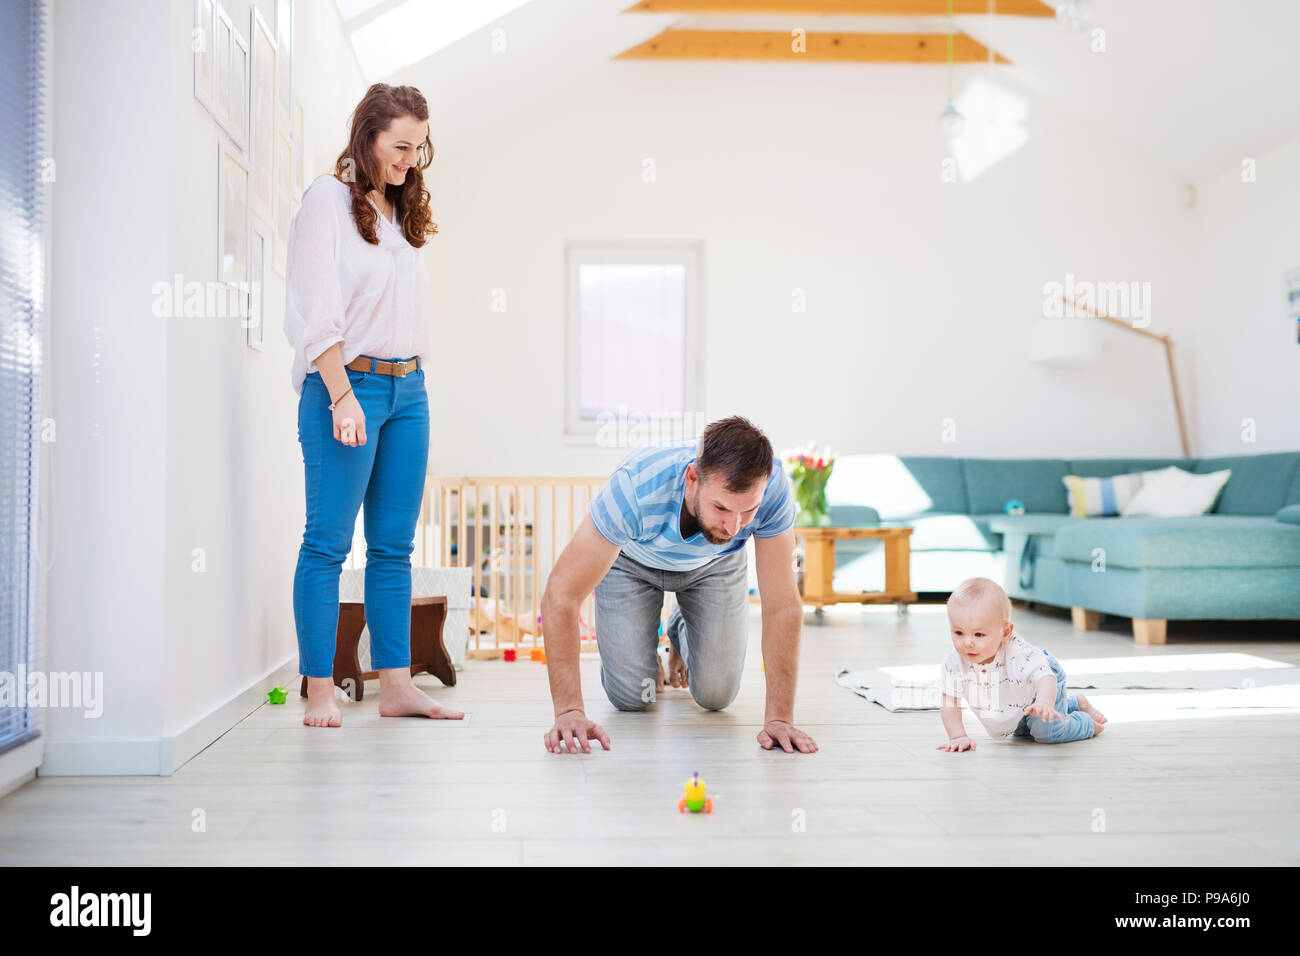 Young family playing with a baby boy at home. Stock Photo